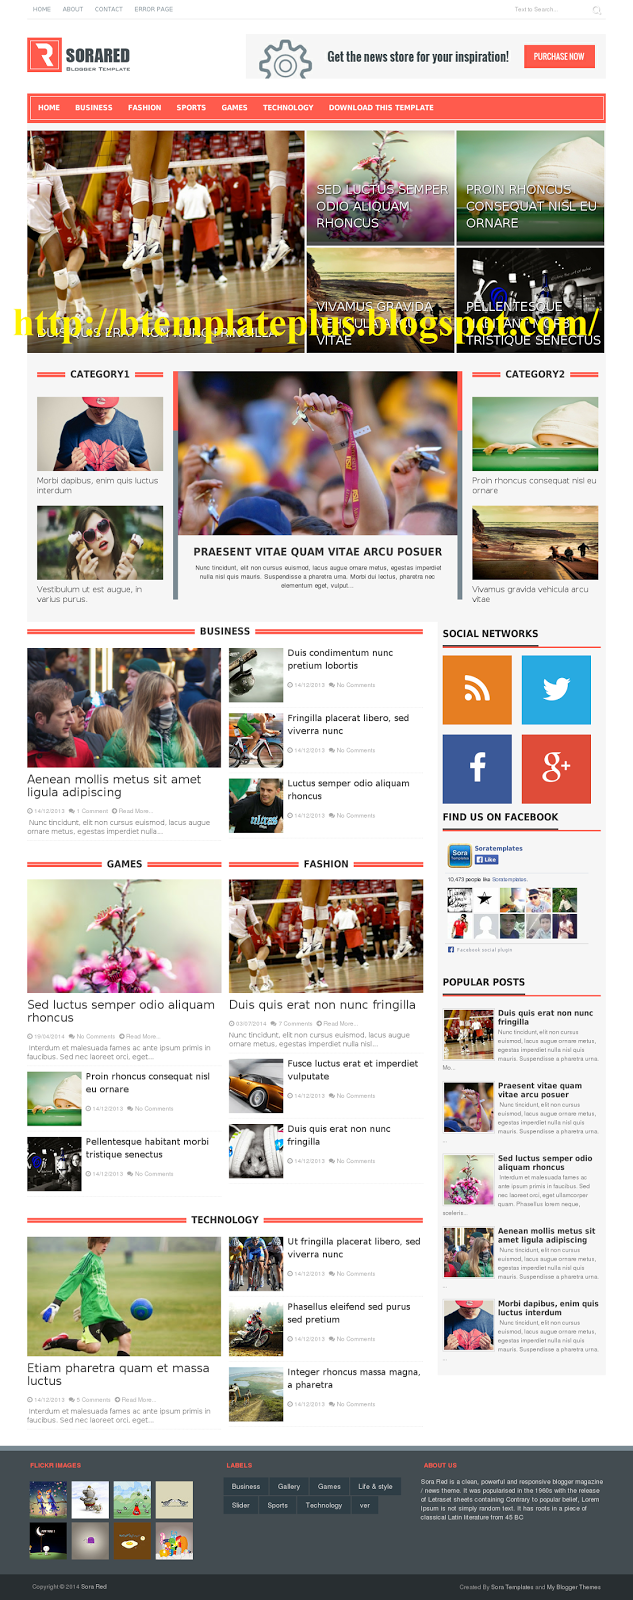 Image Download free great functional Sora Red blogger template 